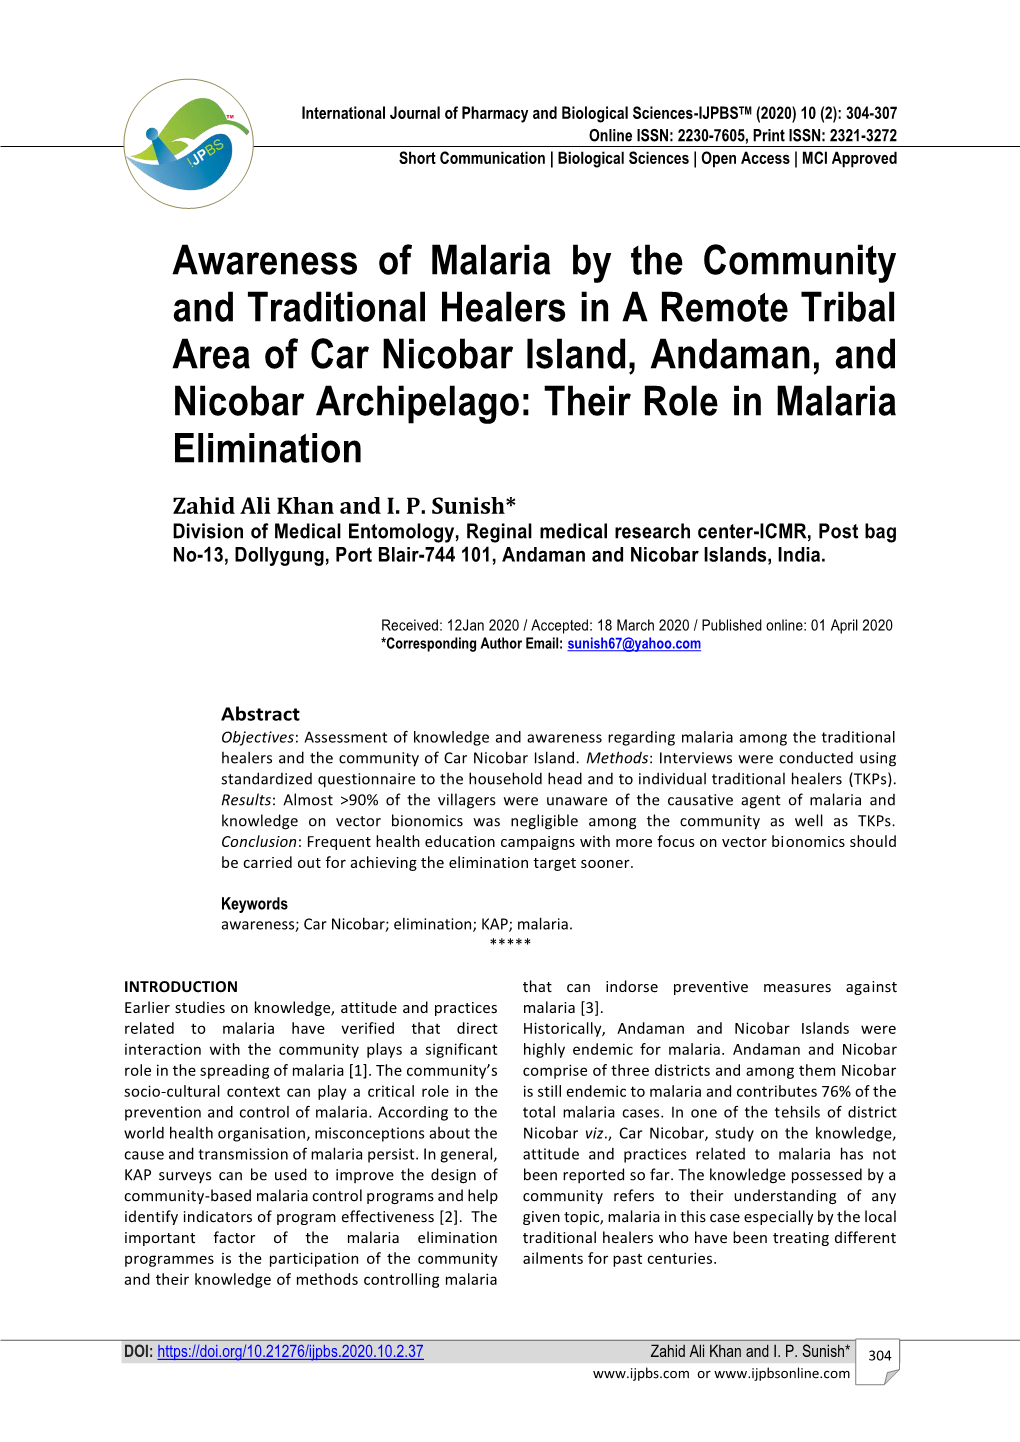 Awareness of Malaria by the Community and Traditional Healers